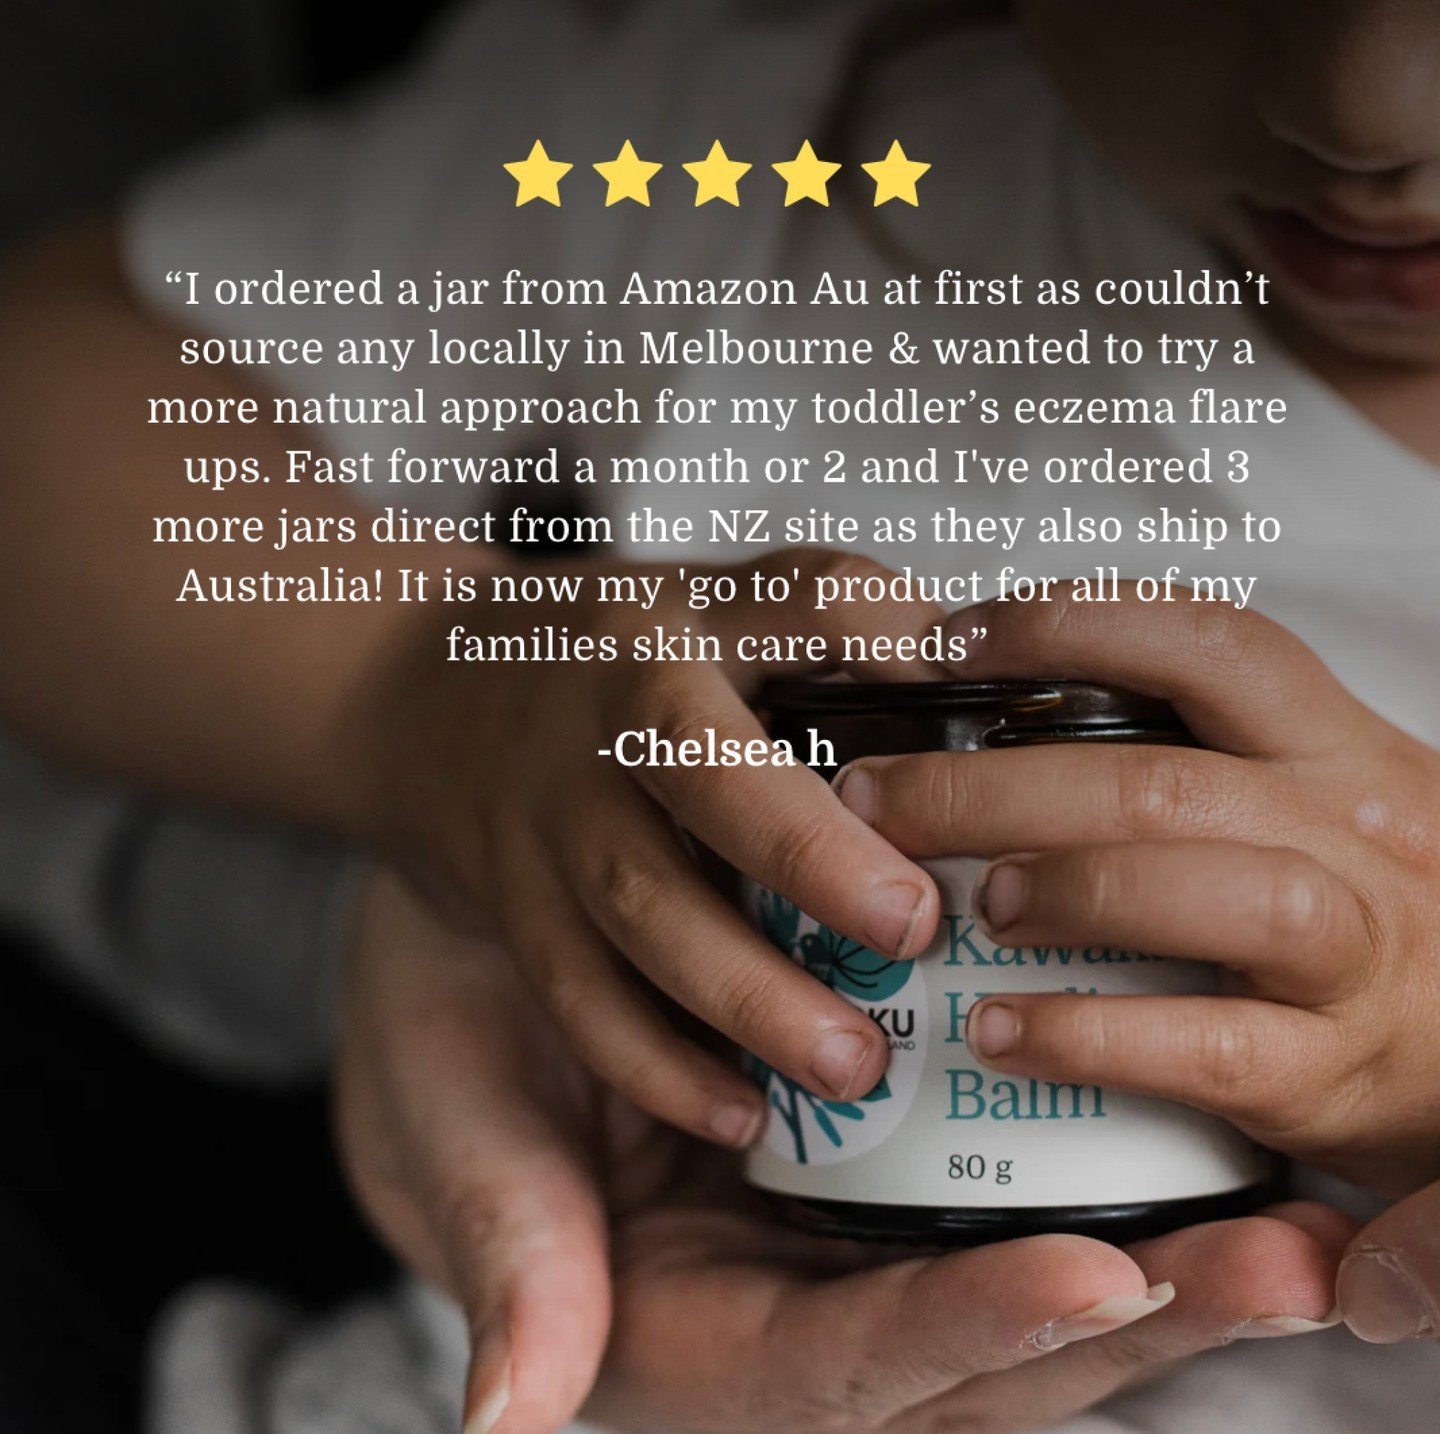 Have you looked at the amazing feedback regarding our skincare range? Check out the link in our bio to discover what our customers are saying and why they love it!

#sensitiveskin #sensitiveskinsolution #eczema #eczemaskincare #sensitiveskincare